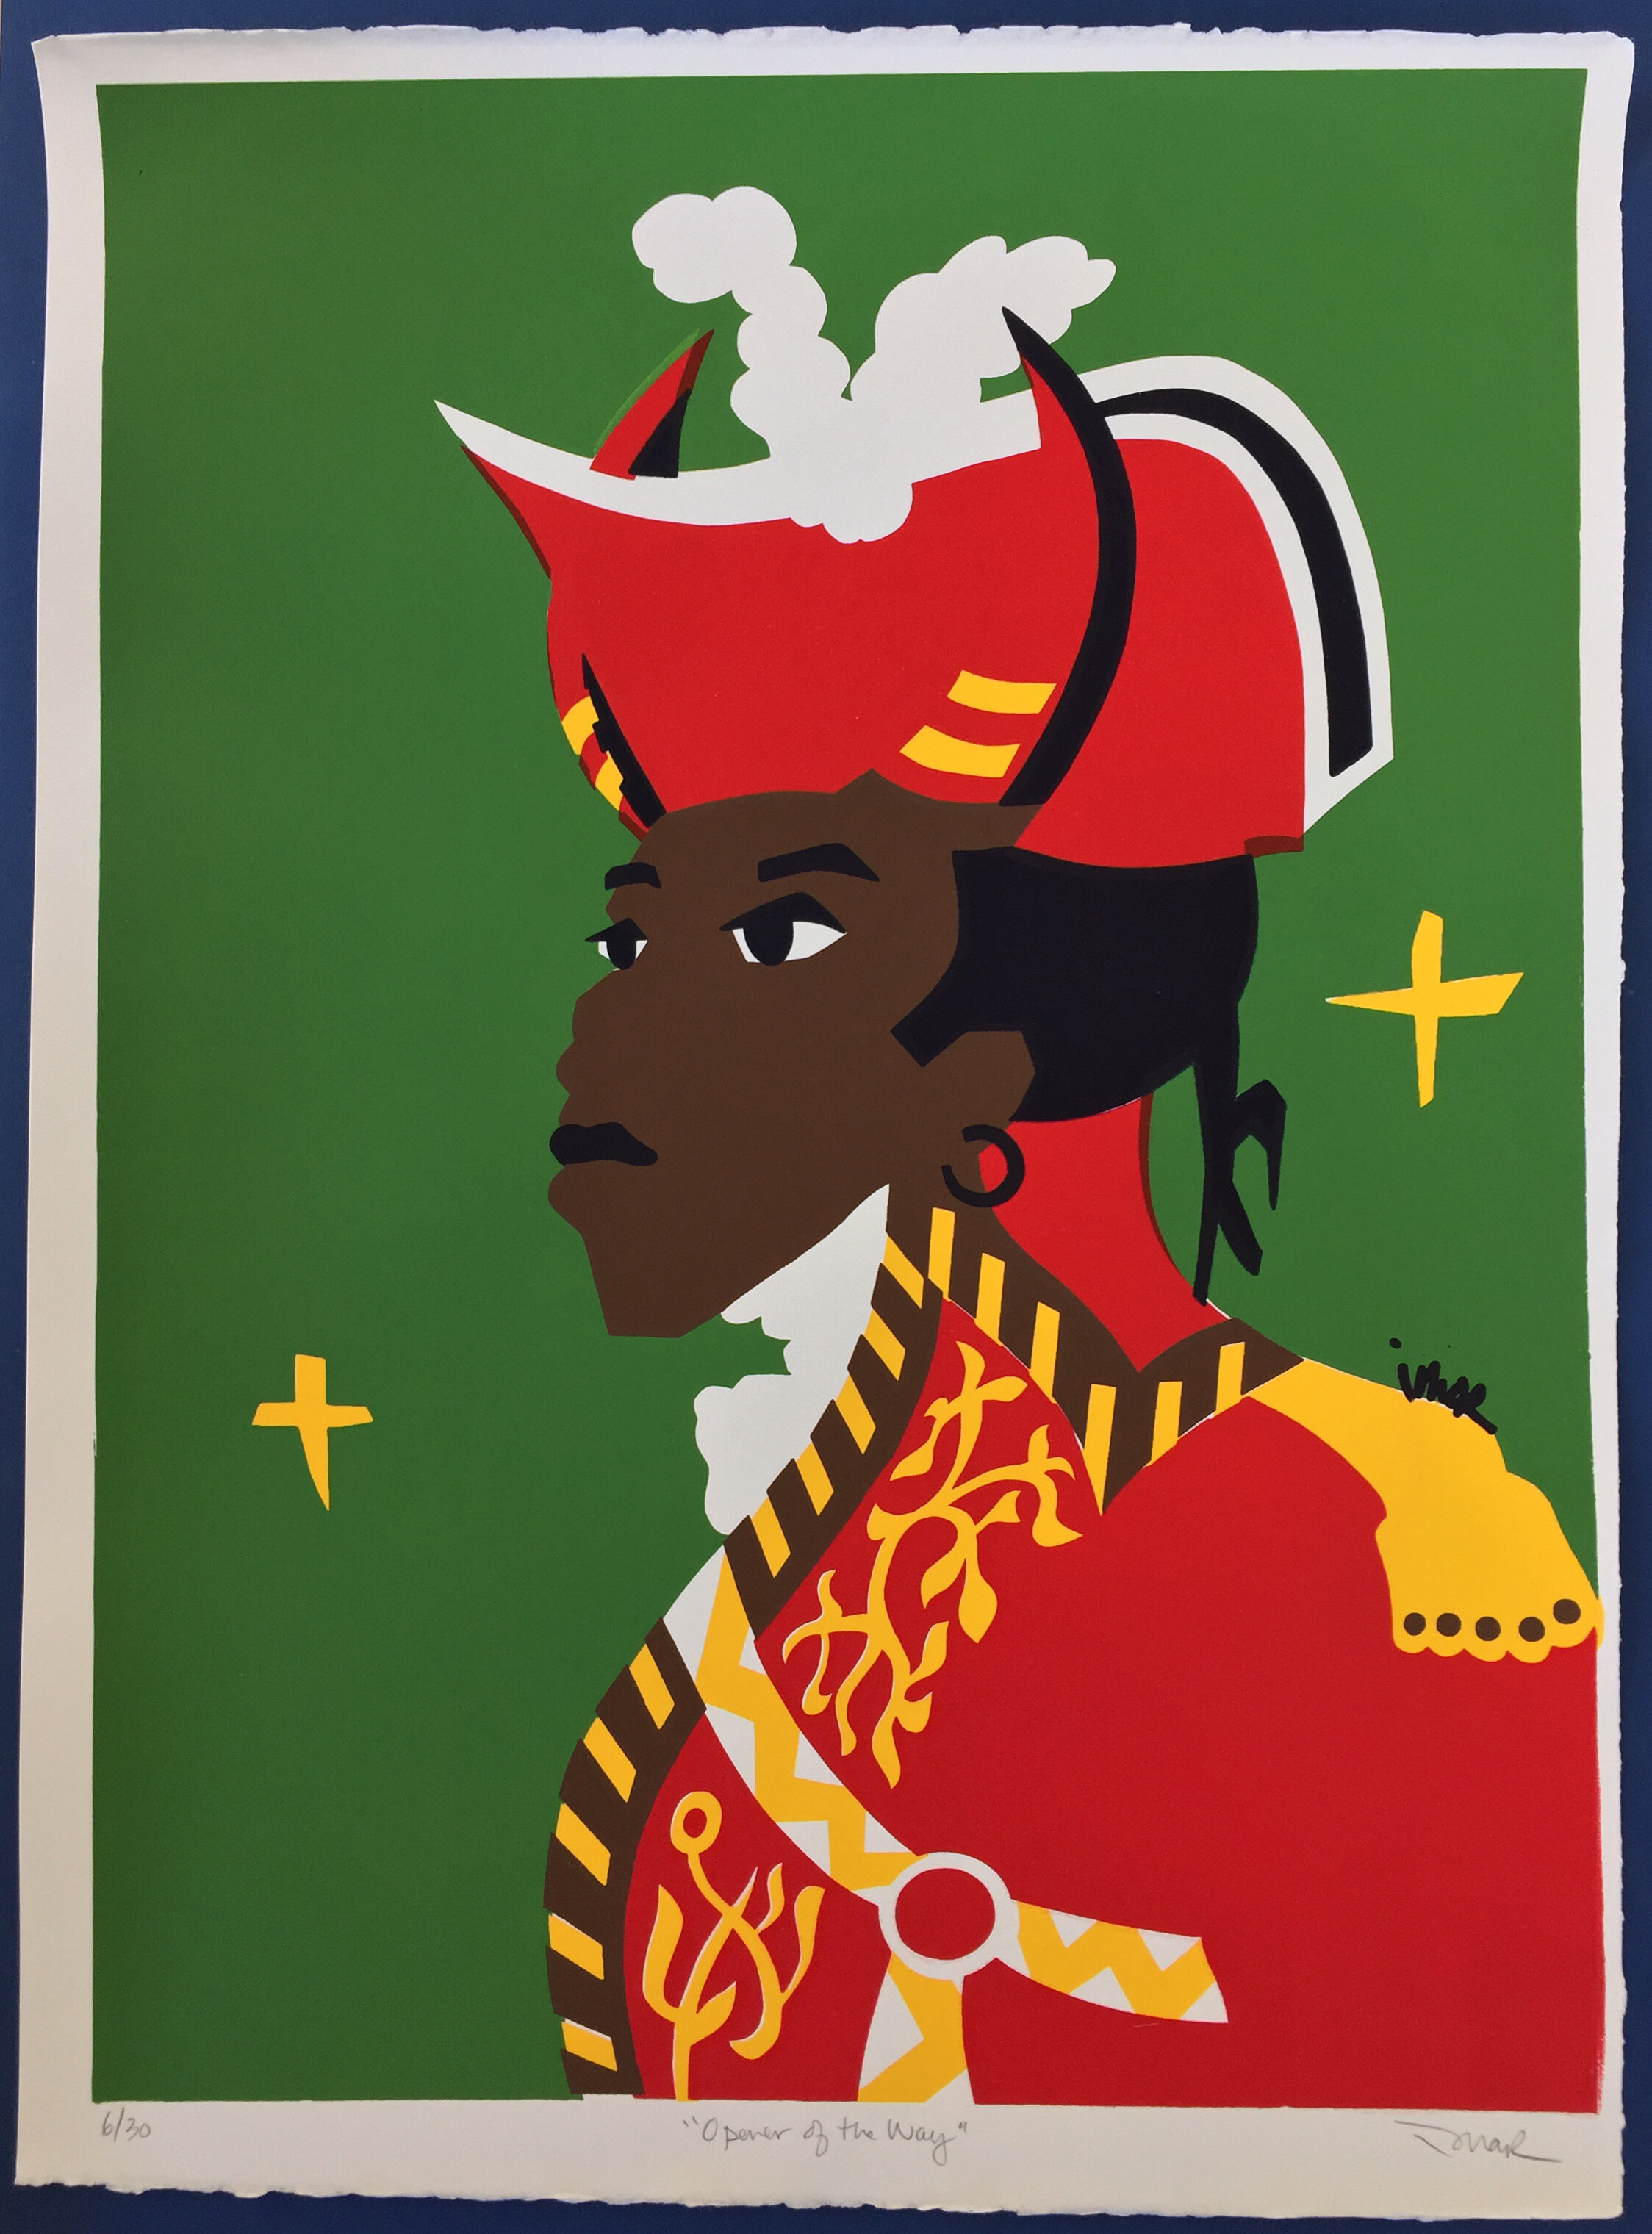 Opener of the Way [Toussaint Louverture]